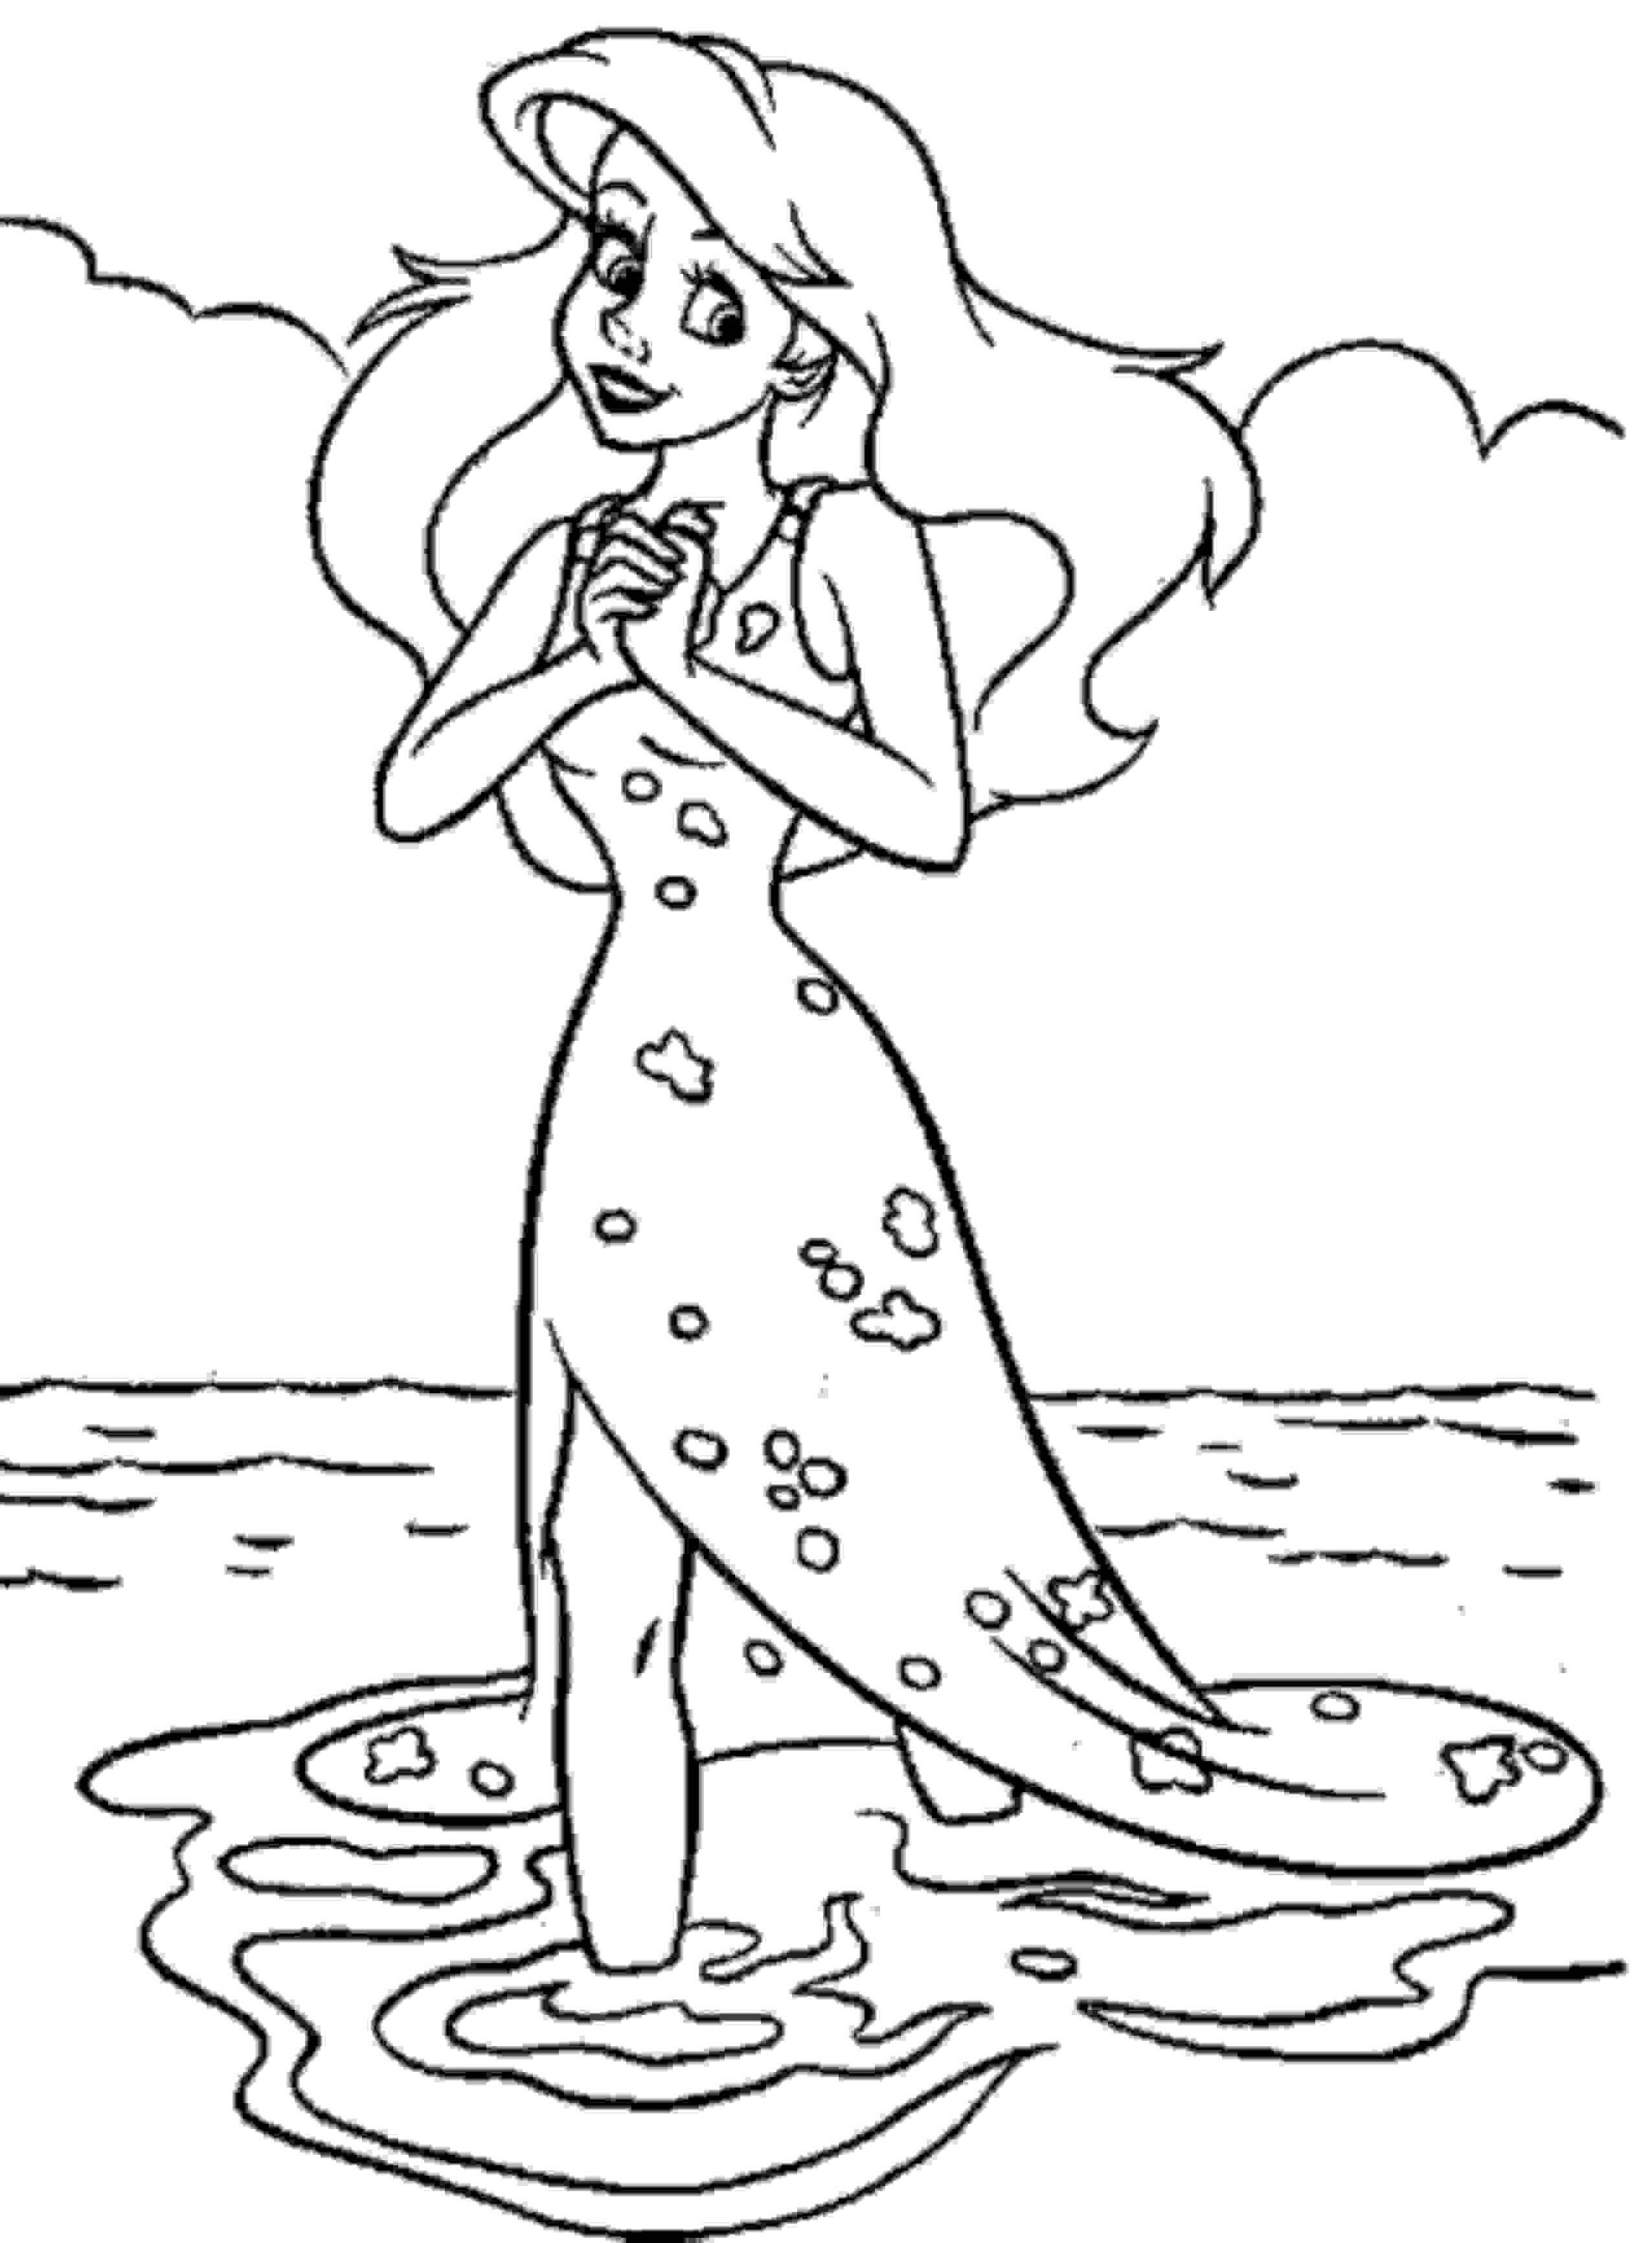 Free Ariel Coloring Pages Coloring Ideas The Little Mermaid Coloring Pages Free To Print